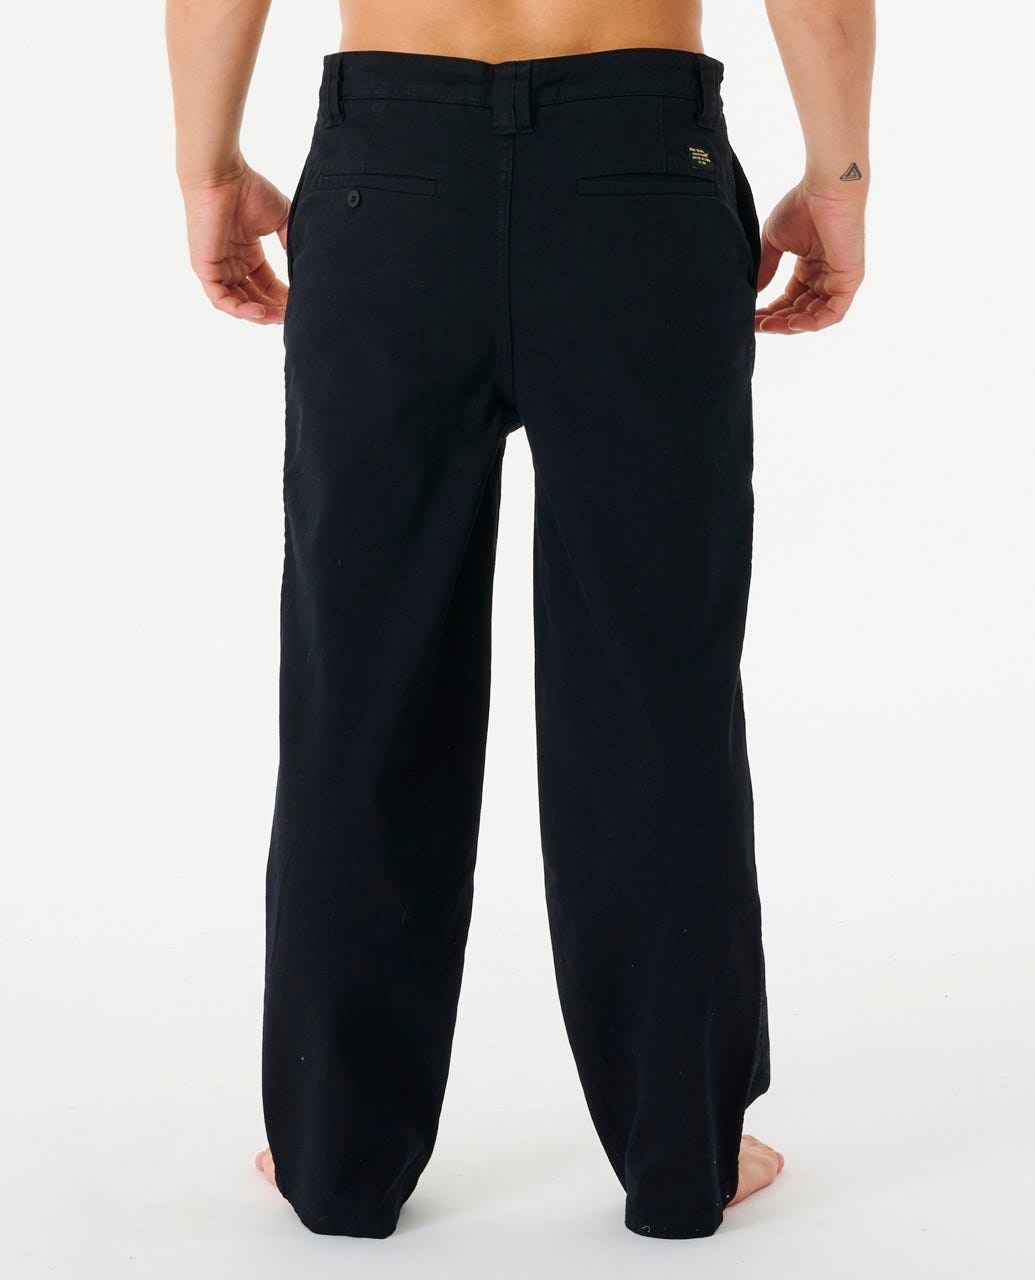 RIP CURL QUALITY SURF PRODUCTS 00CMPA-0090 PANT (M)